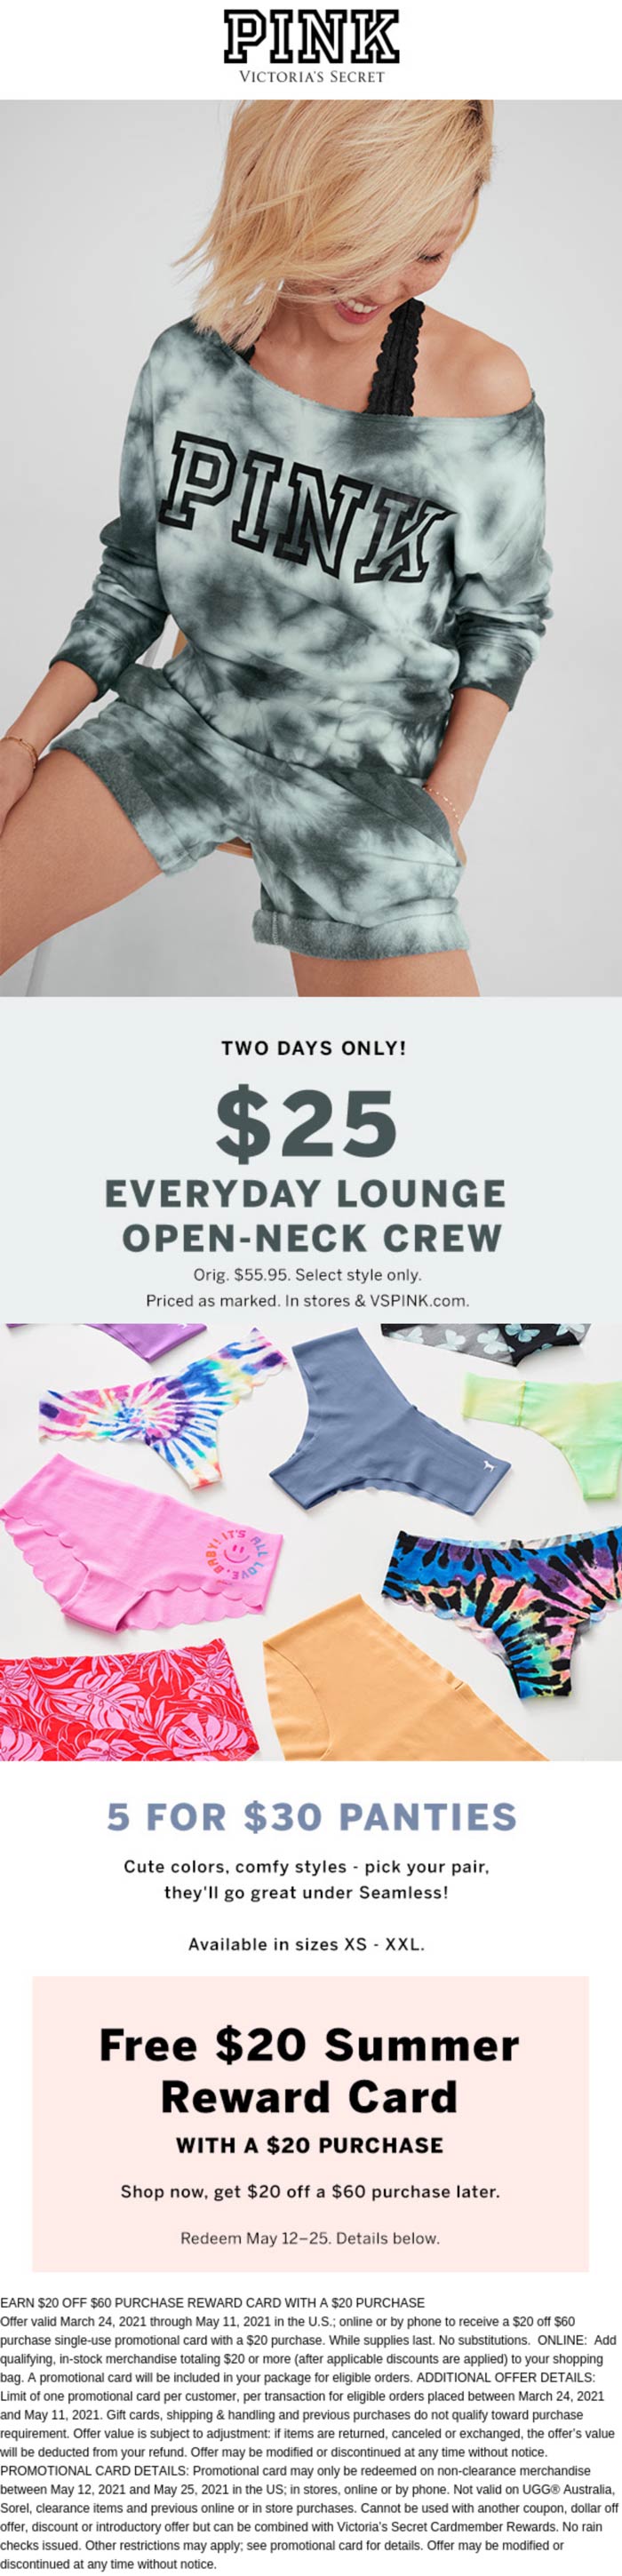 25 crew + free 20 store card with 20 spent at Victorias Secret PINK